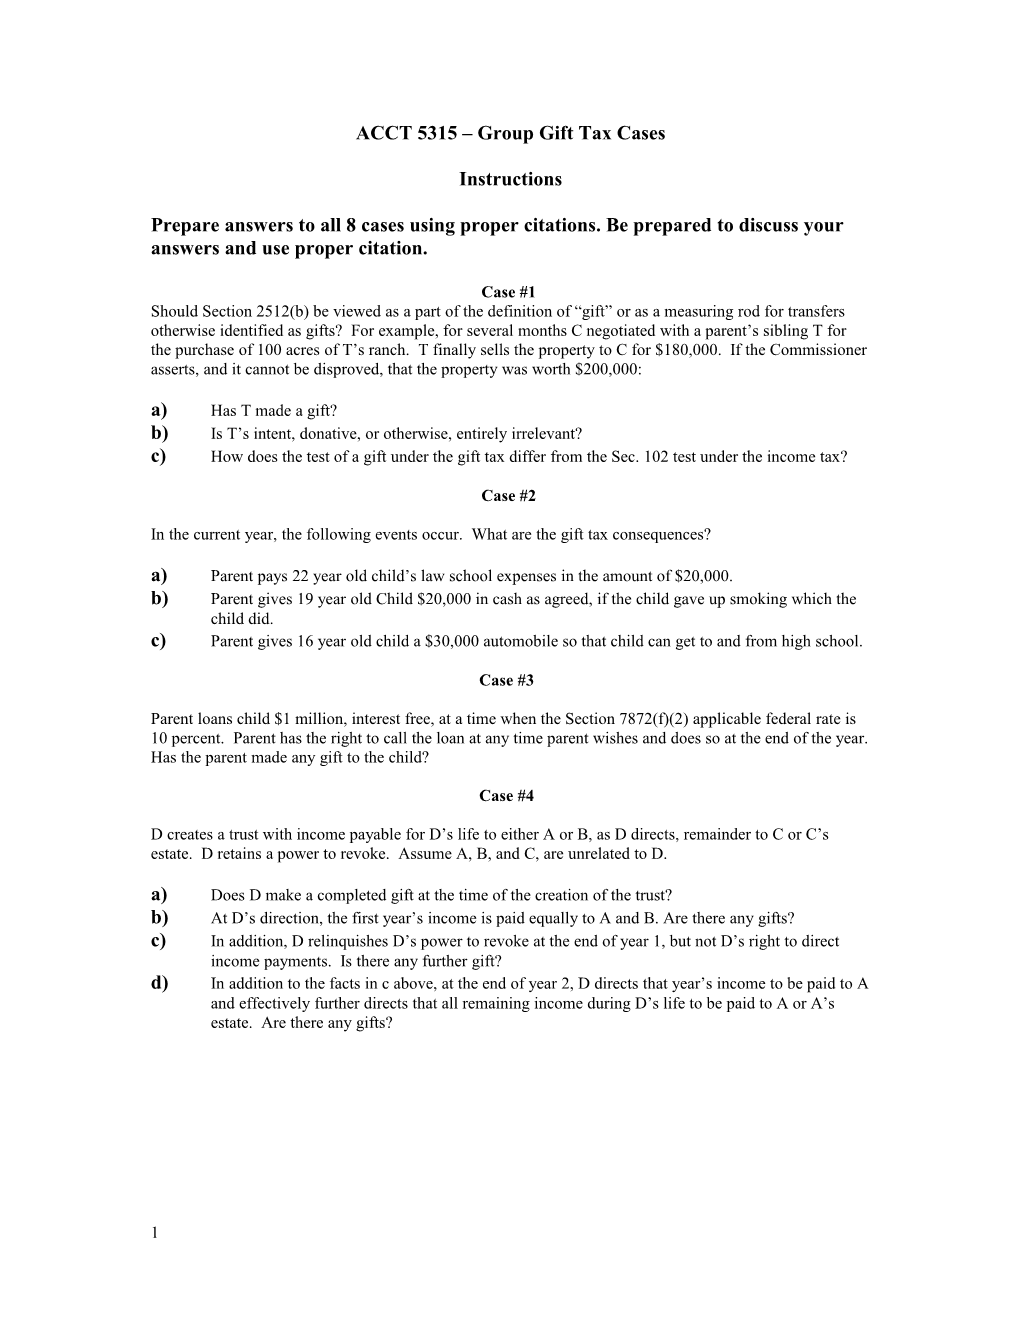 ACCT 5315 Gift Tax Group Assignment s1